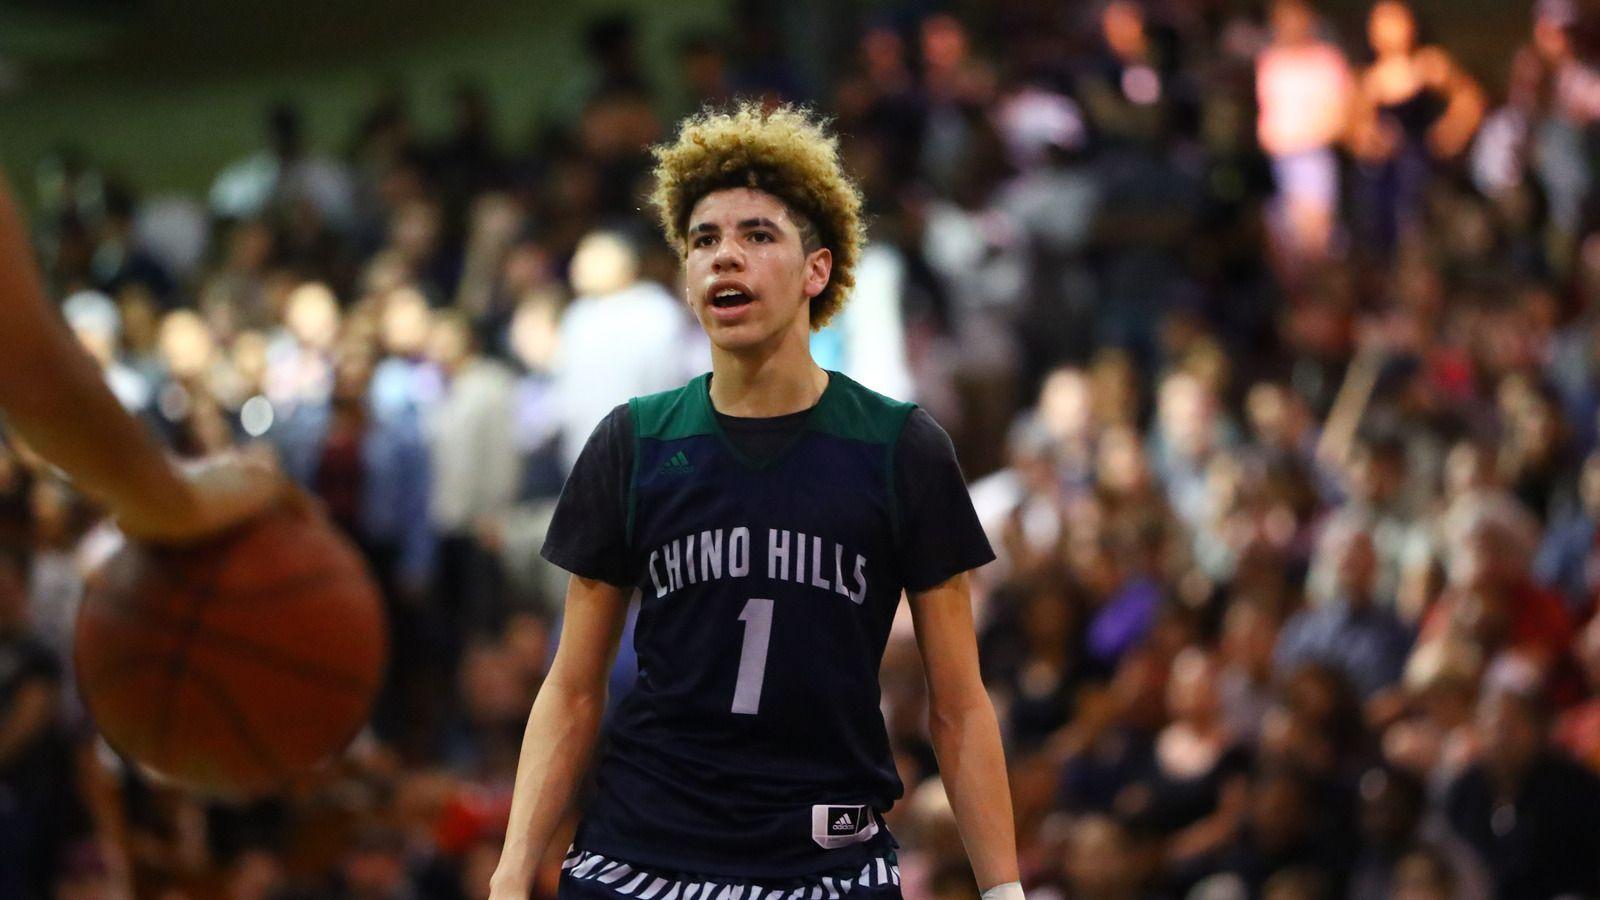 Mocking 15 Year Old LaMelo Ball Is Taking Things A Bit Too Far